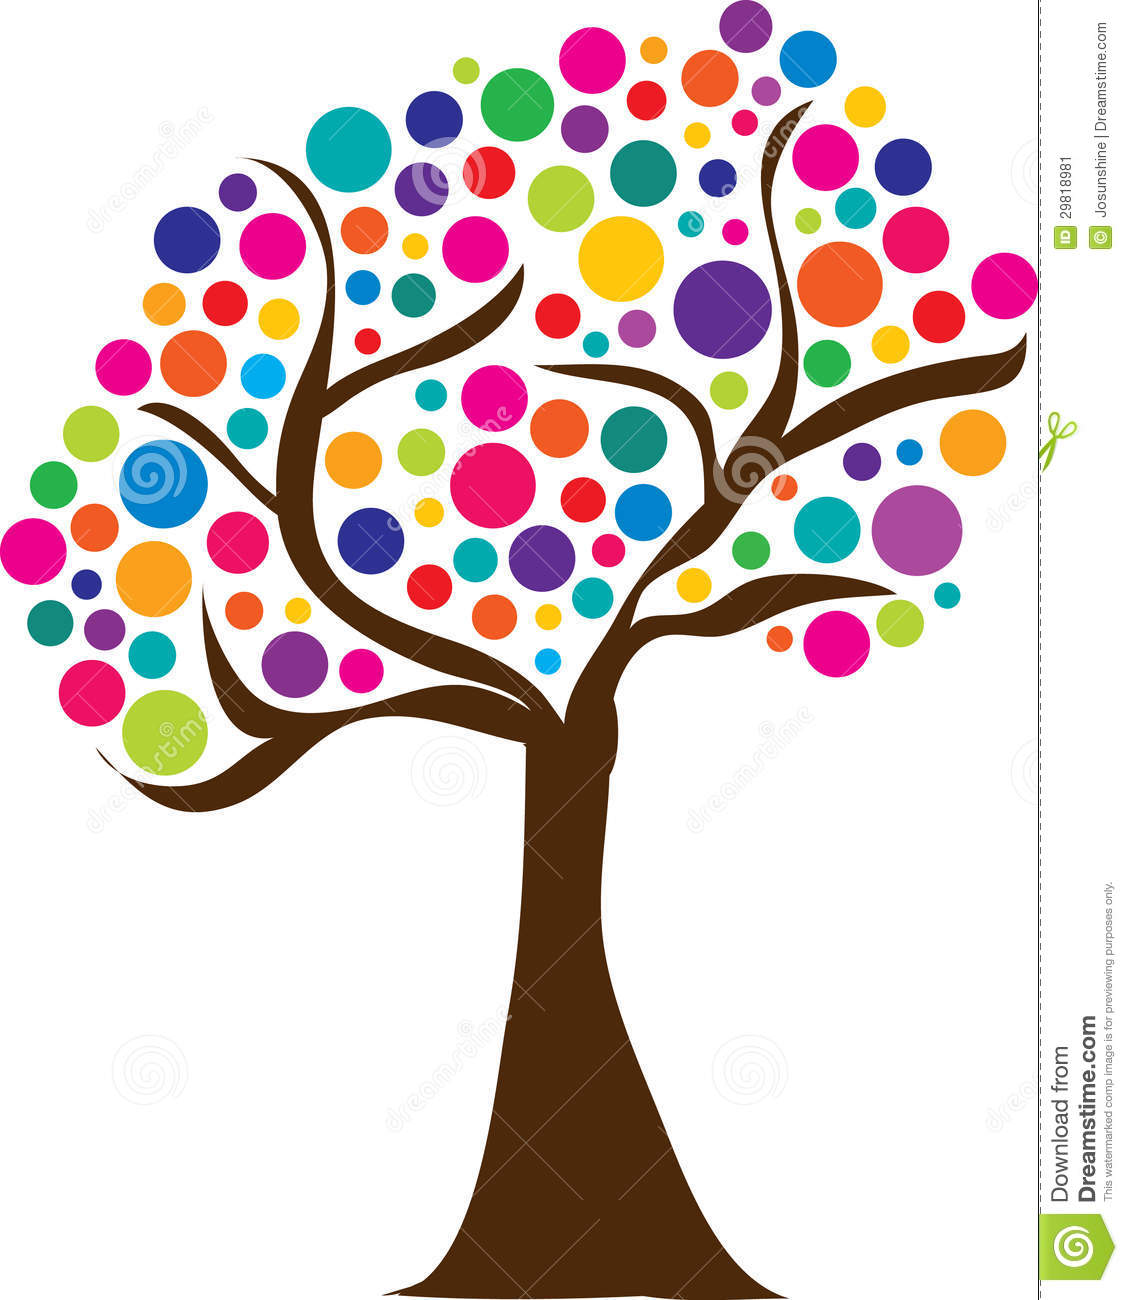 Colorful tree clipart